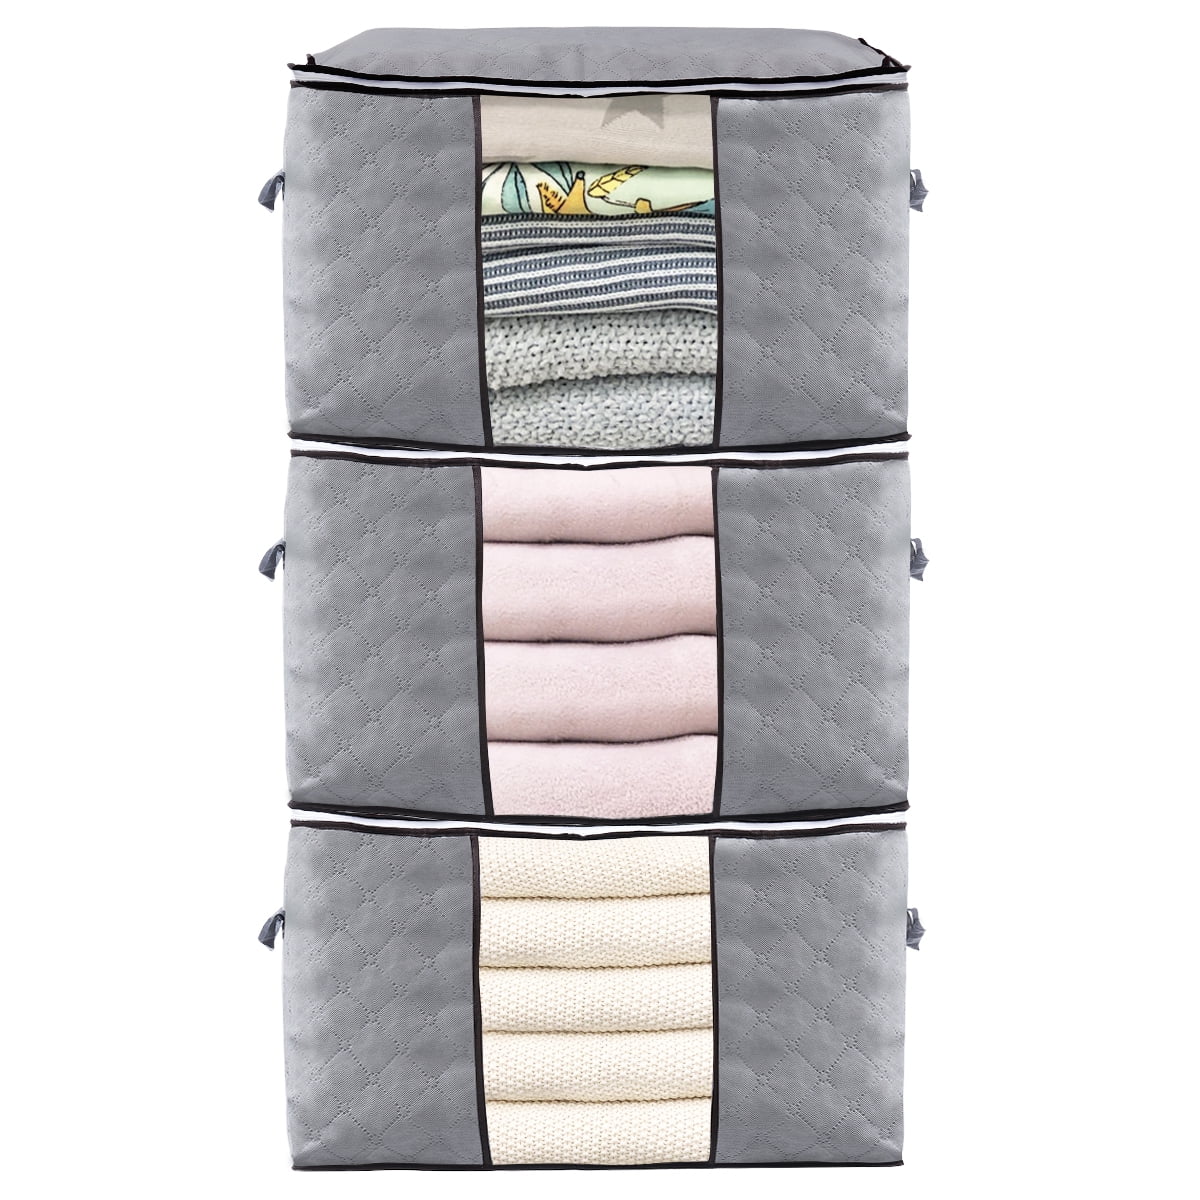 92L Storage Bag Organizer Large Capacity for Clothes Comforters Blankets Bedding 